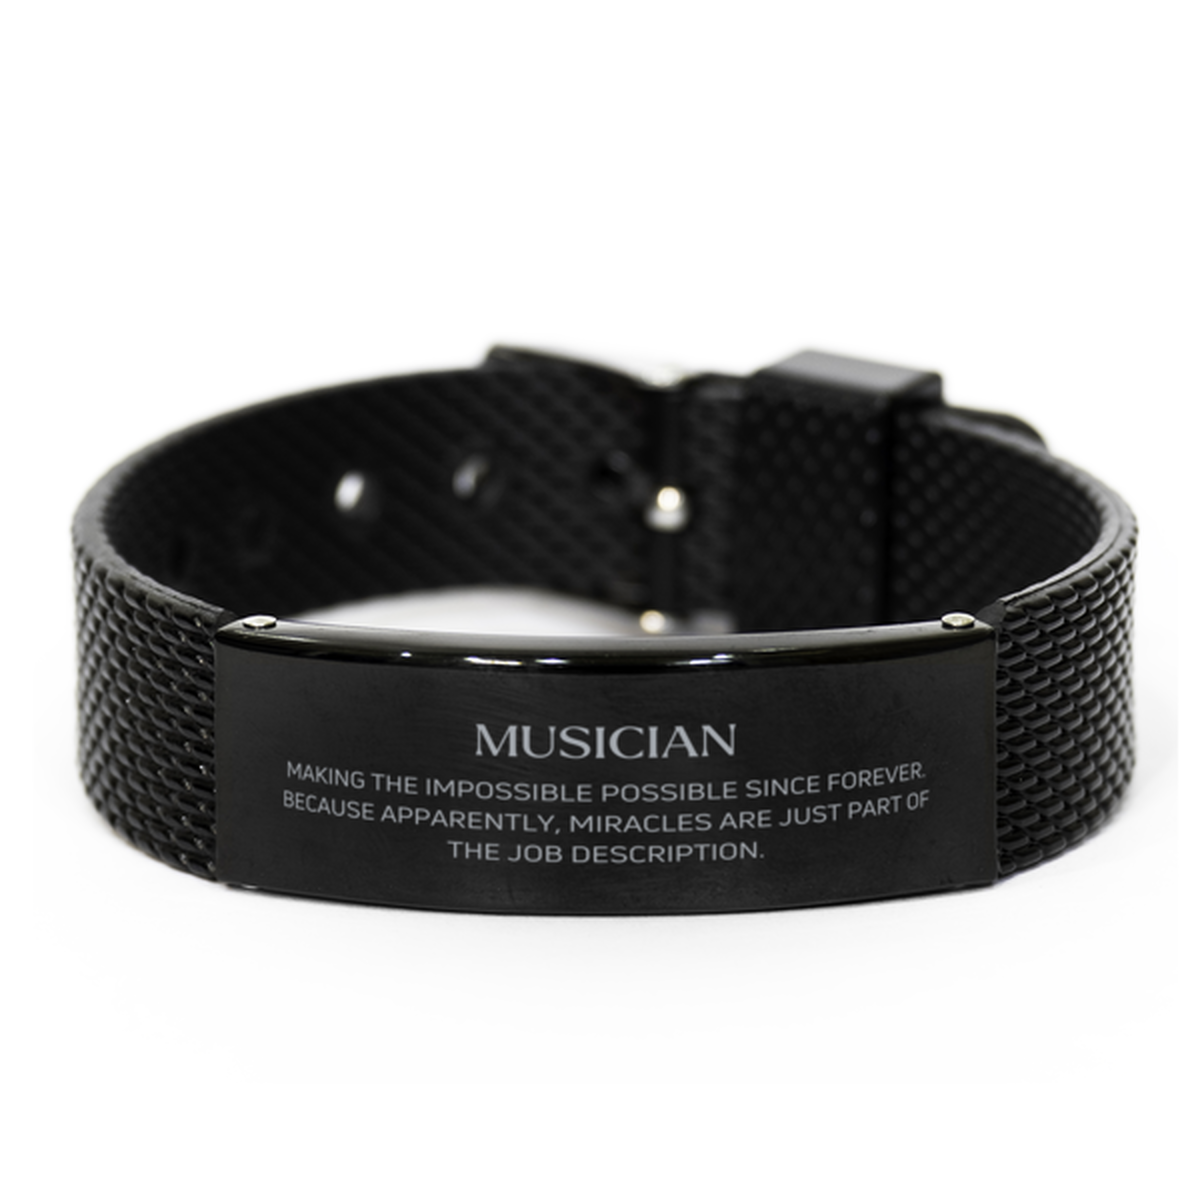 Funny Musician Gifts, Miracles are just part of the job description, Inspirational Birthday Black Shark Mesh Bracelet For Musician, Men, Women, Coworkers, Friends, Boss